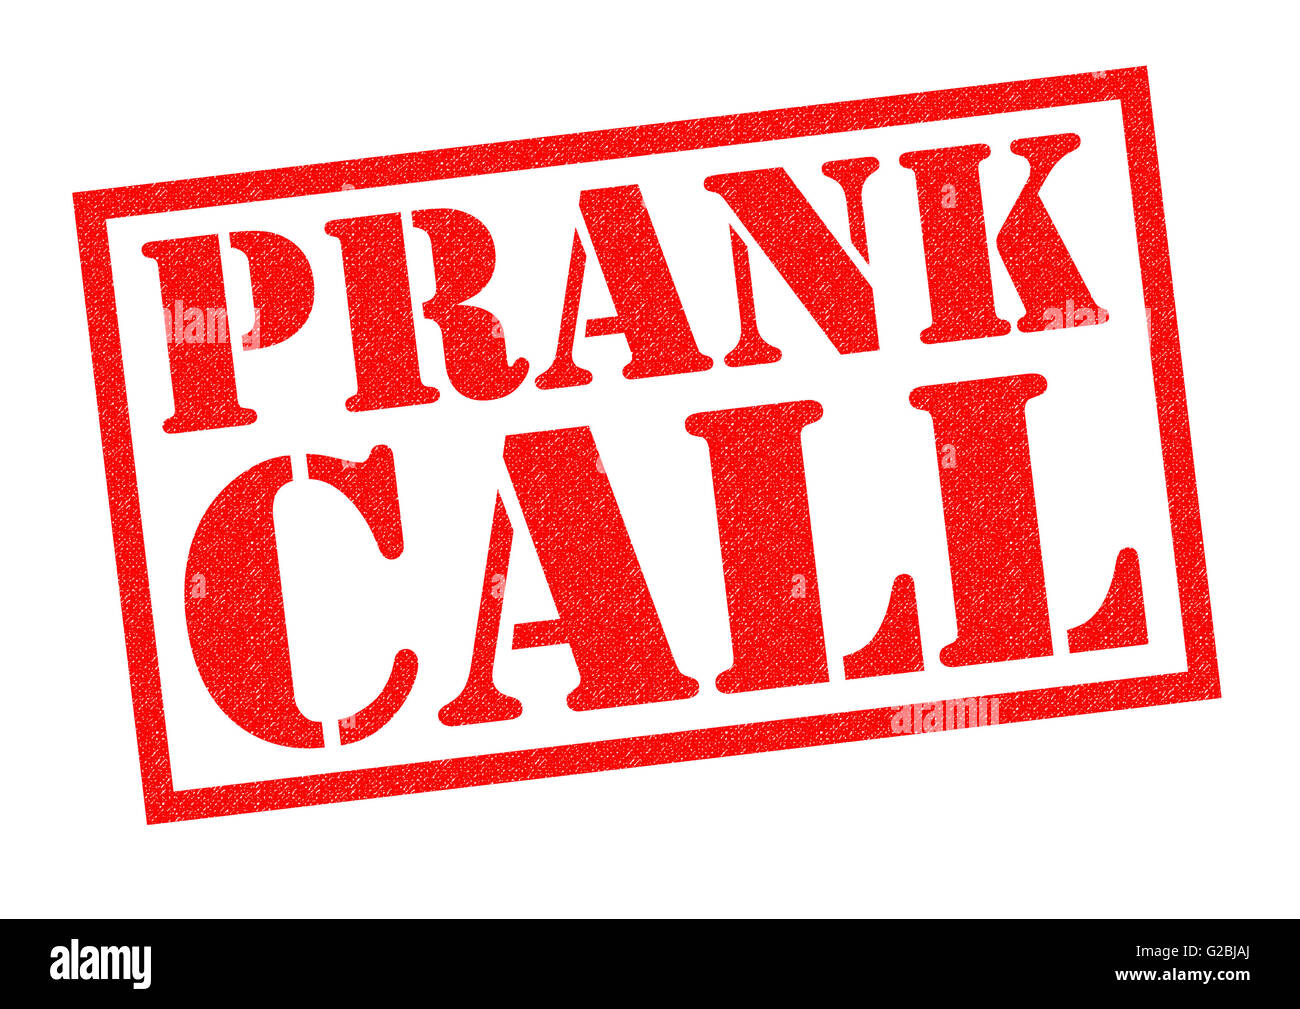 PRANK CALL red Rubber Stamp over a white background. Stock Photo